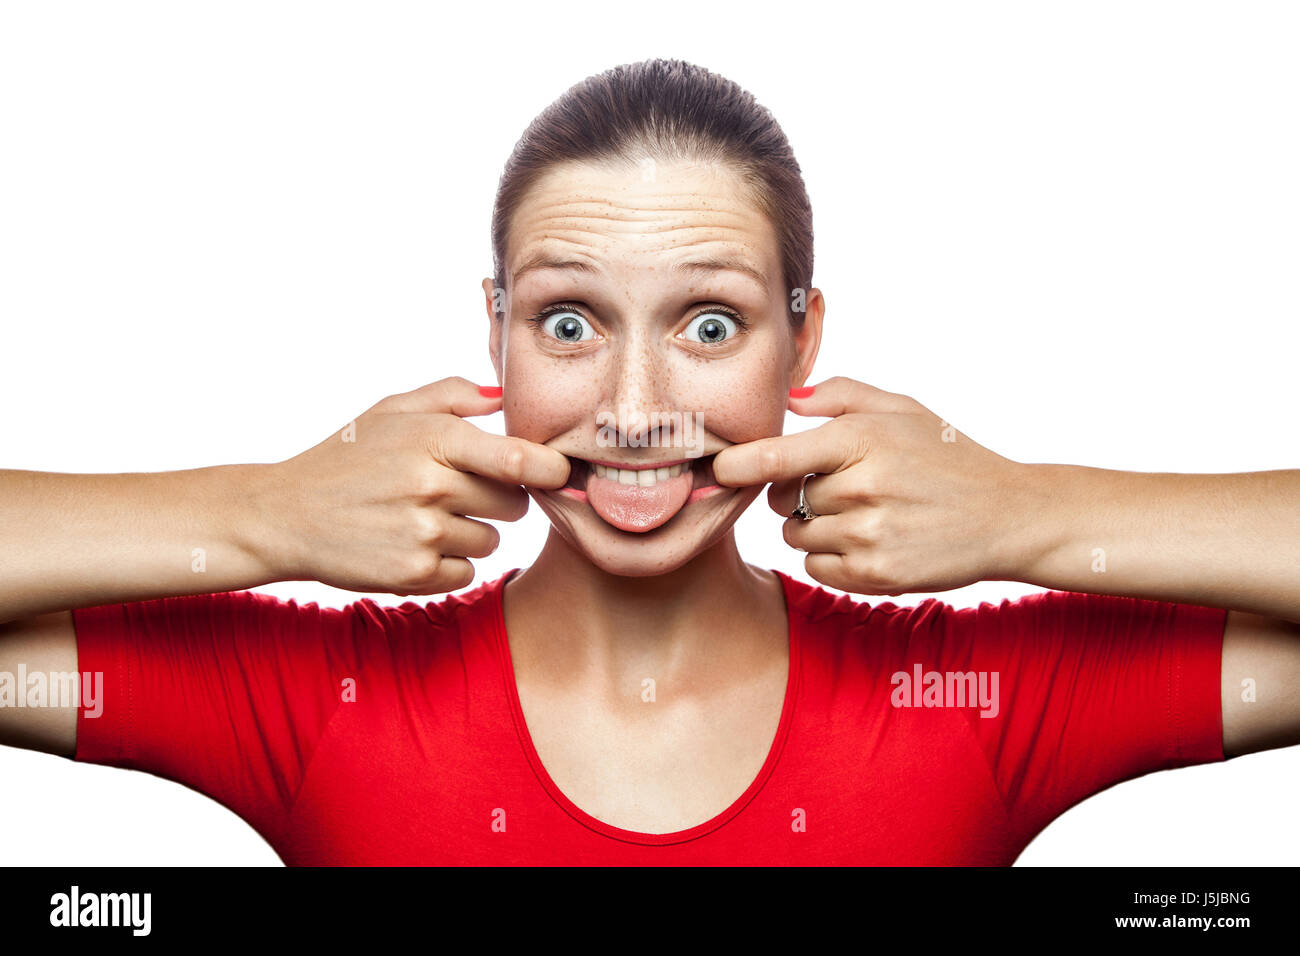 Portrait of crazy funny woman in red t-shirt with freckles. looking at camera, studio shot. isolated on white background. Stock Photo